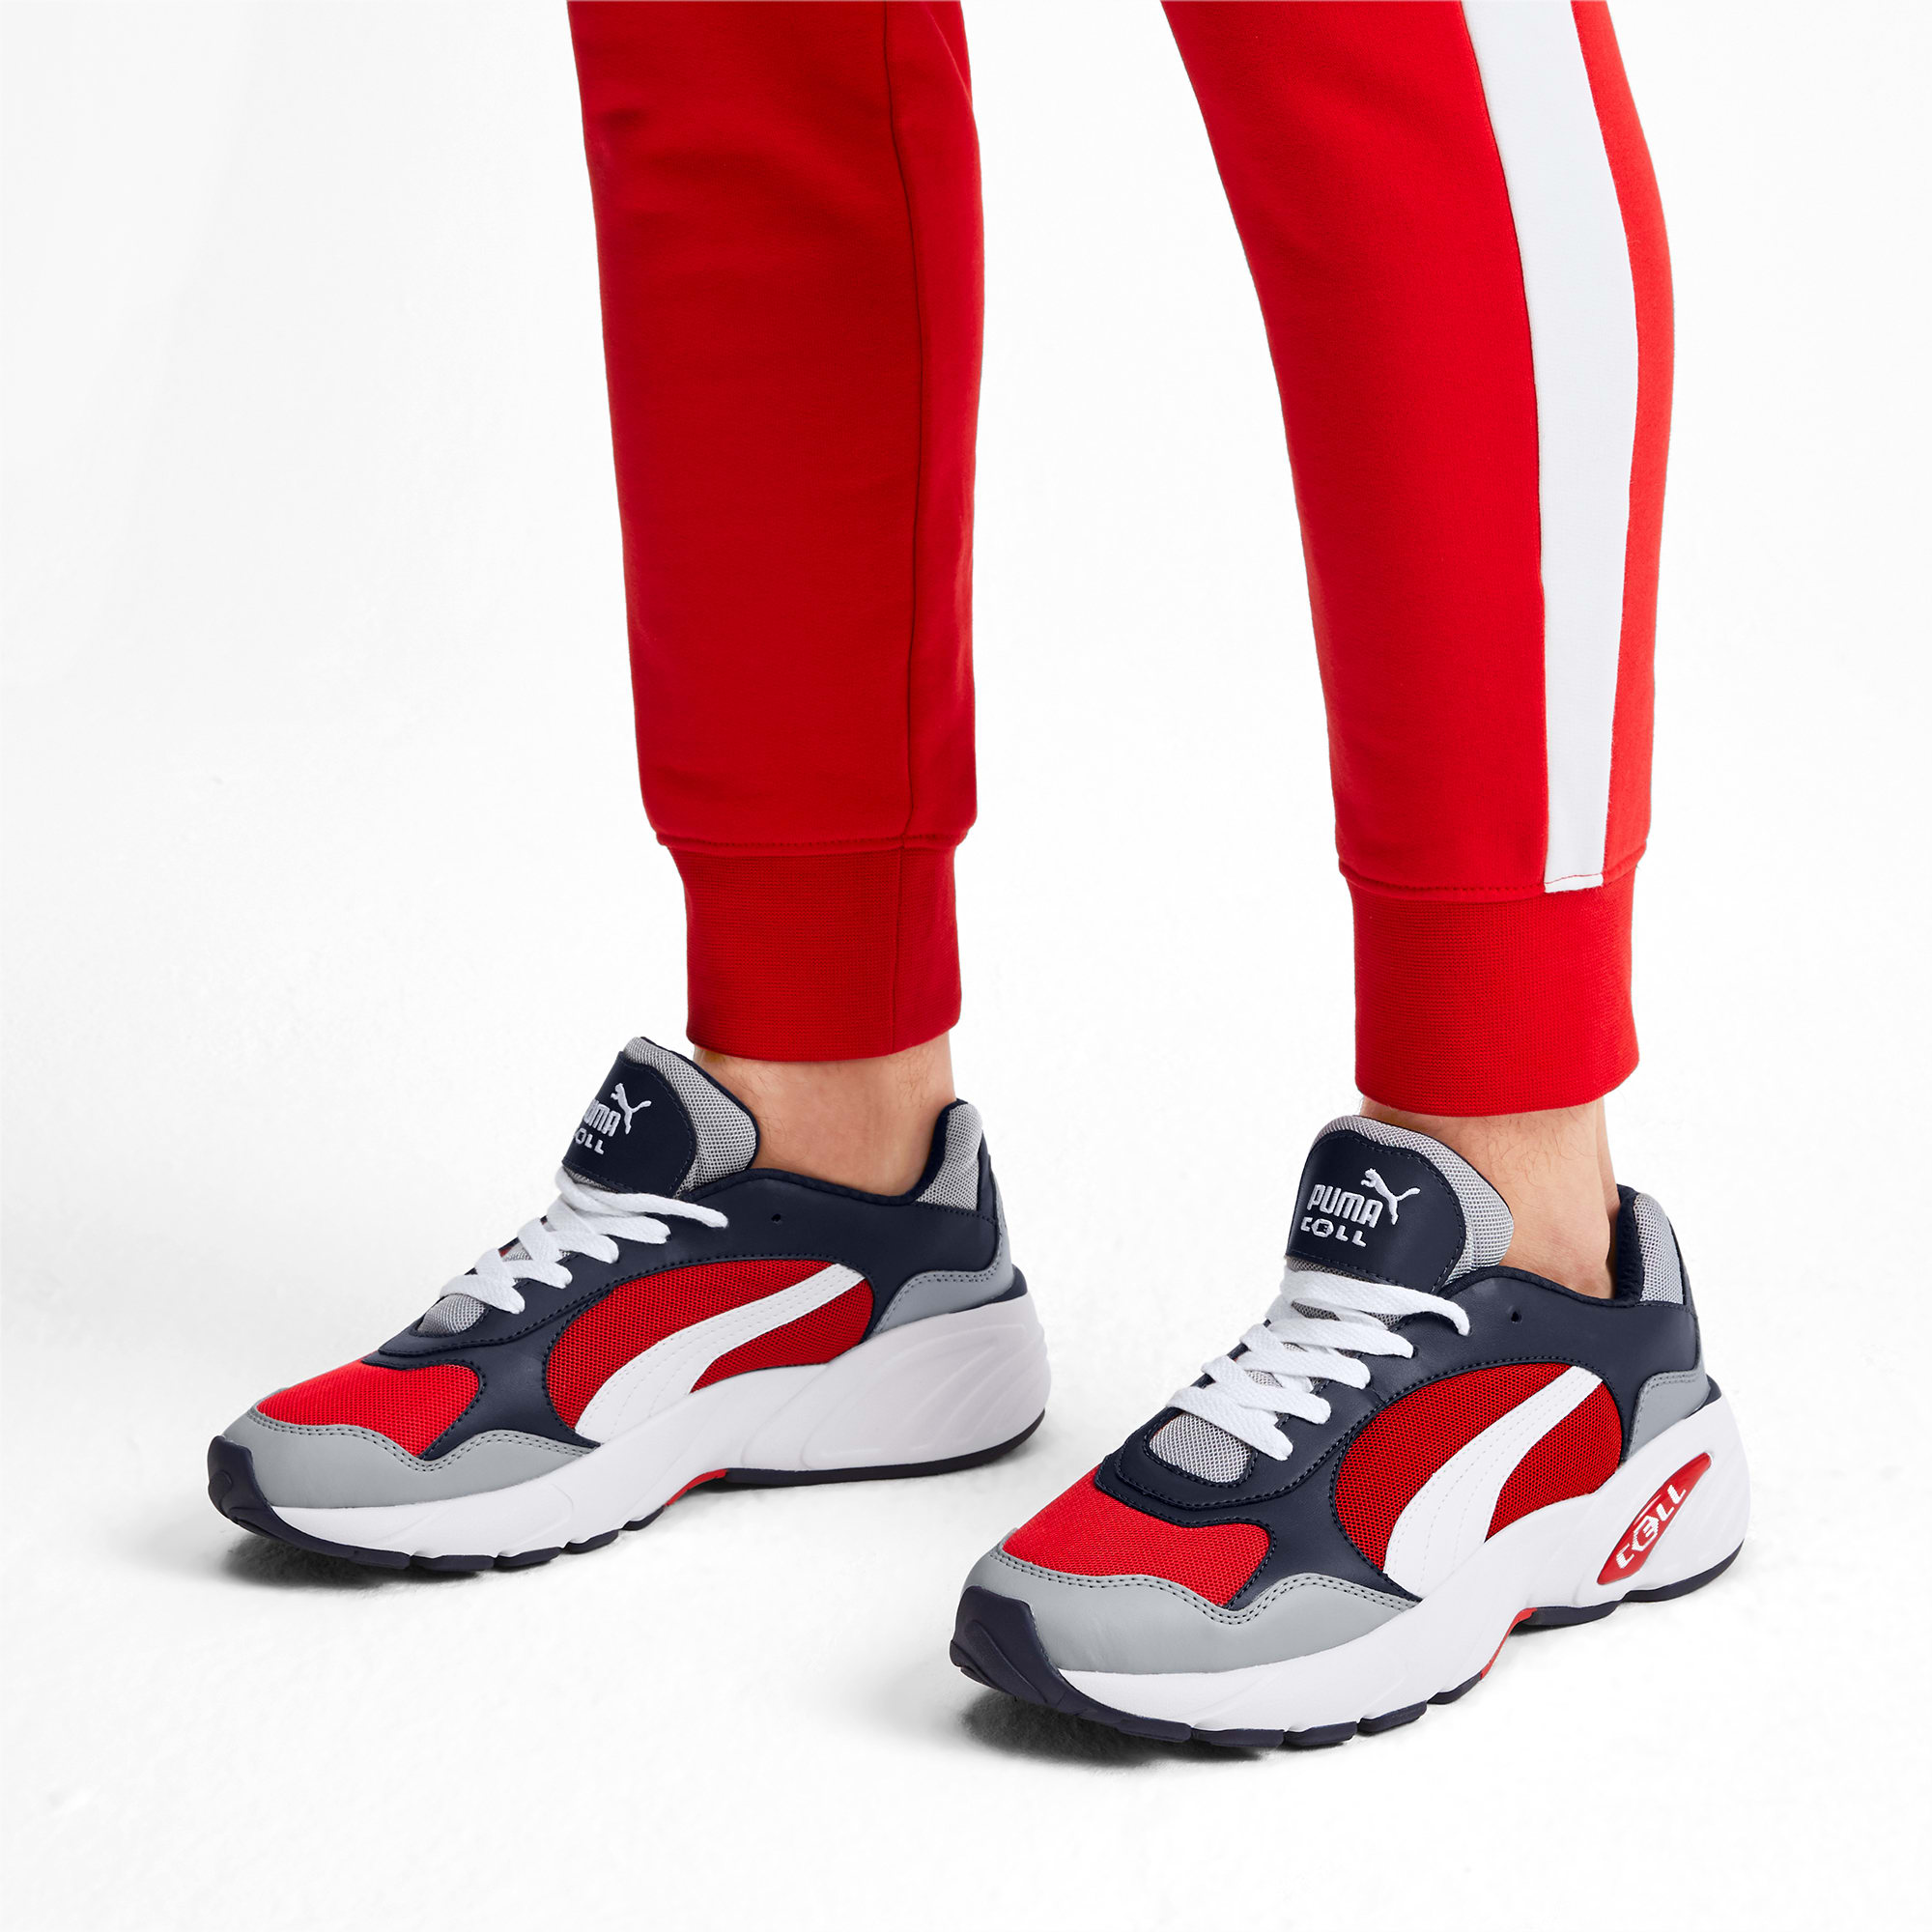 CELL Viper Trainers | Surf The Web-Puma 